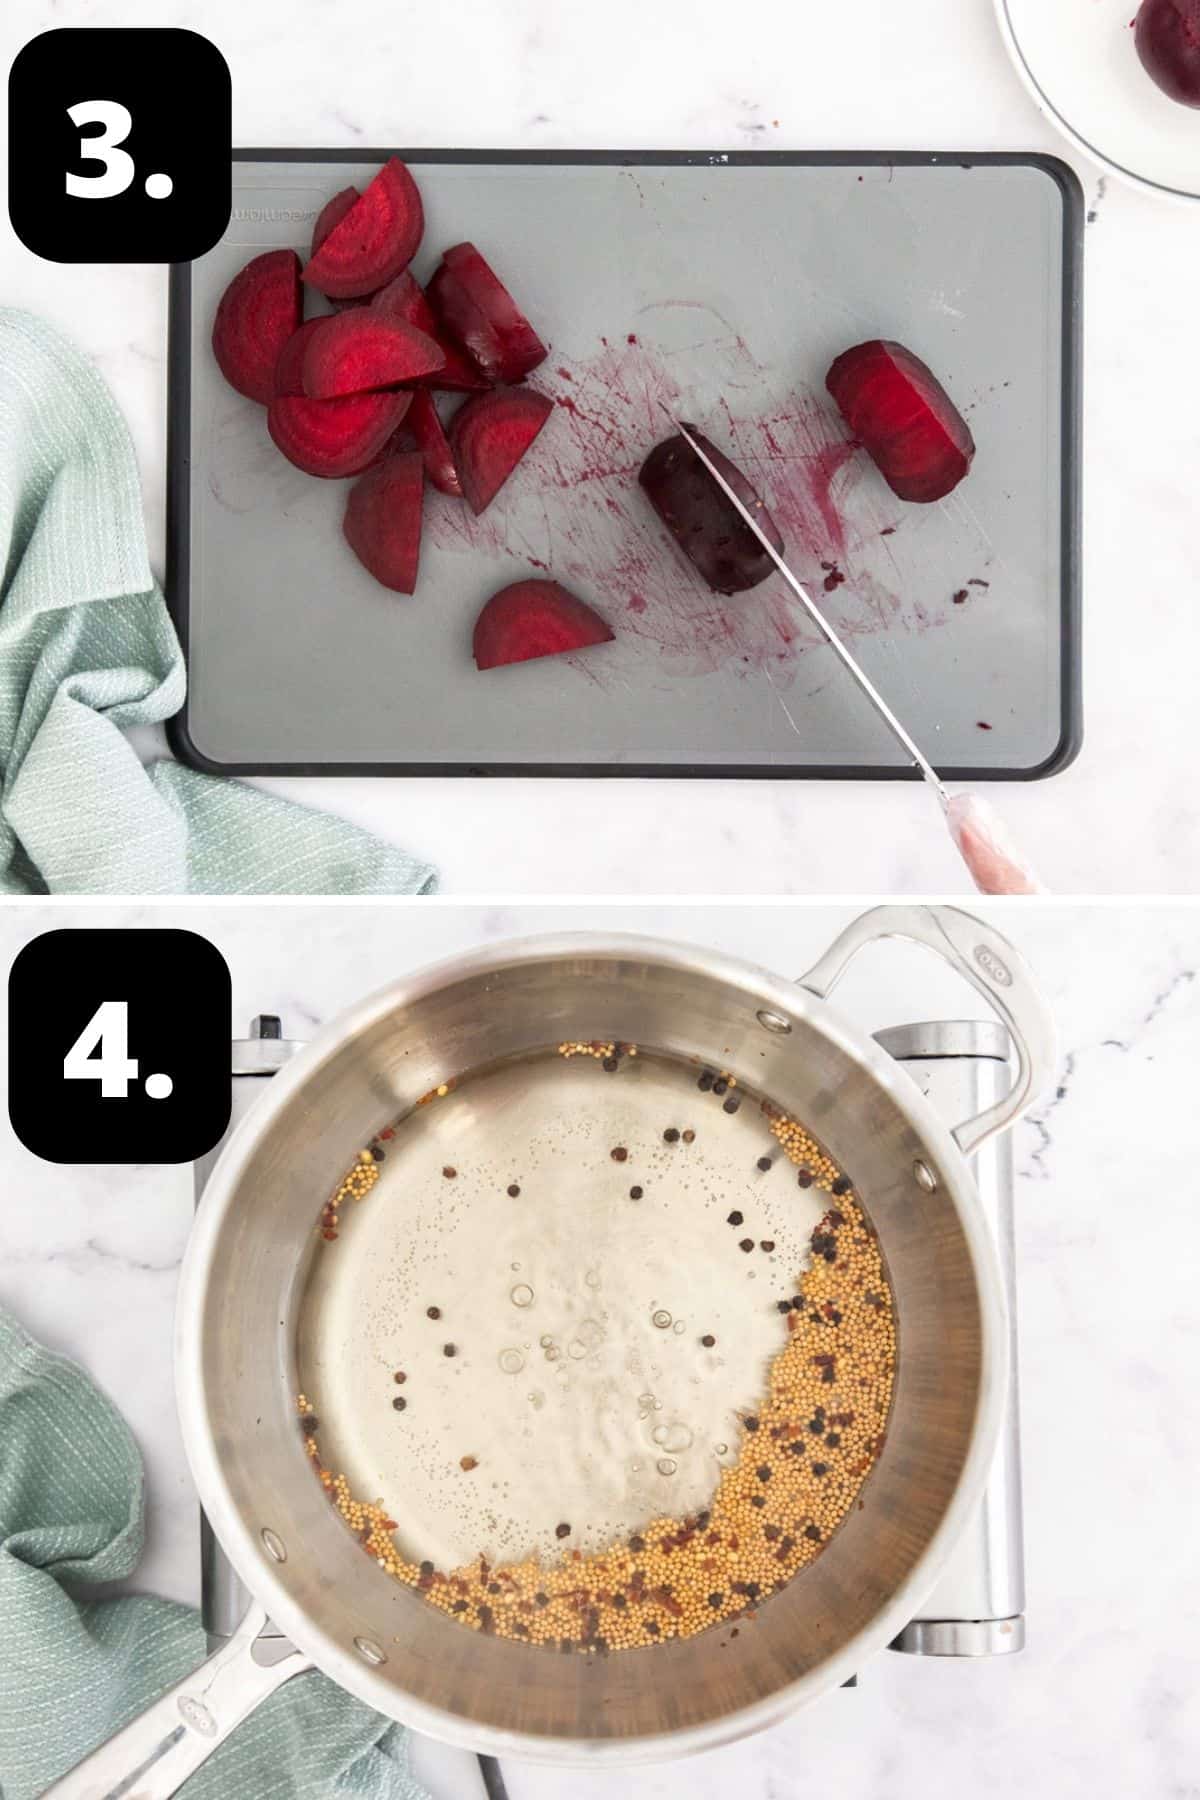 Steps 3-4 of preparing this recipe - slicing the beetroot and making the pickling brine.